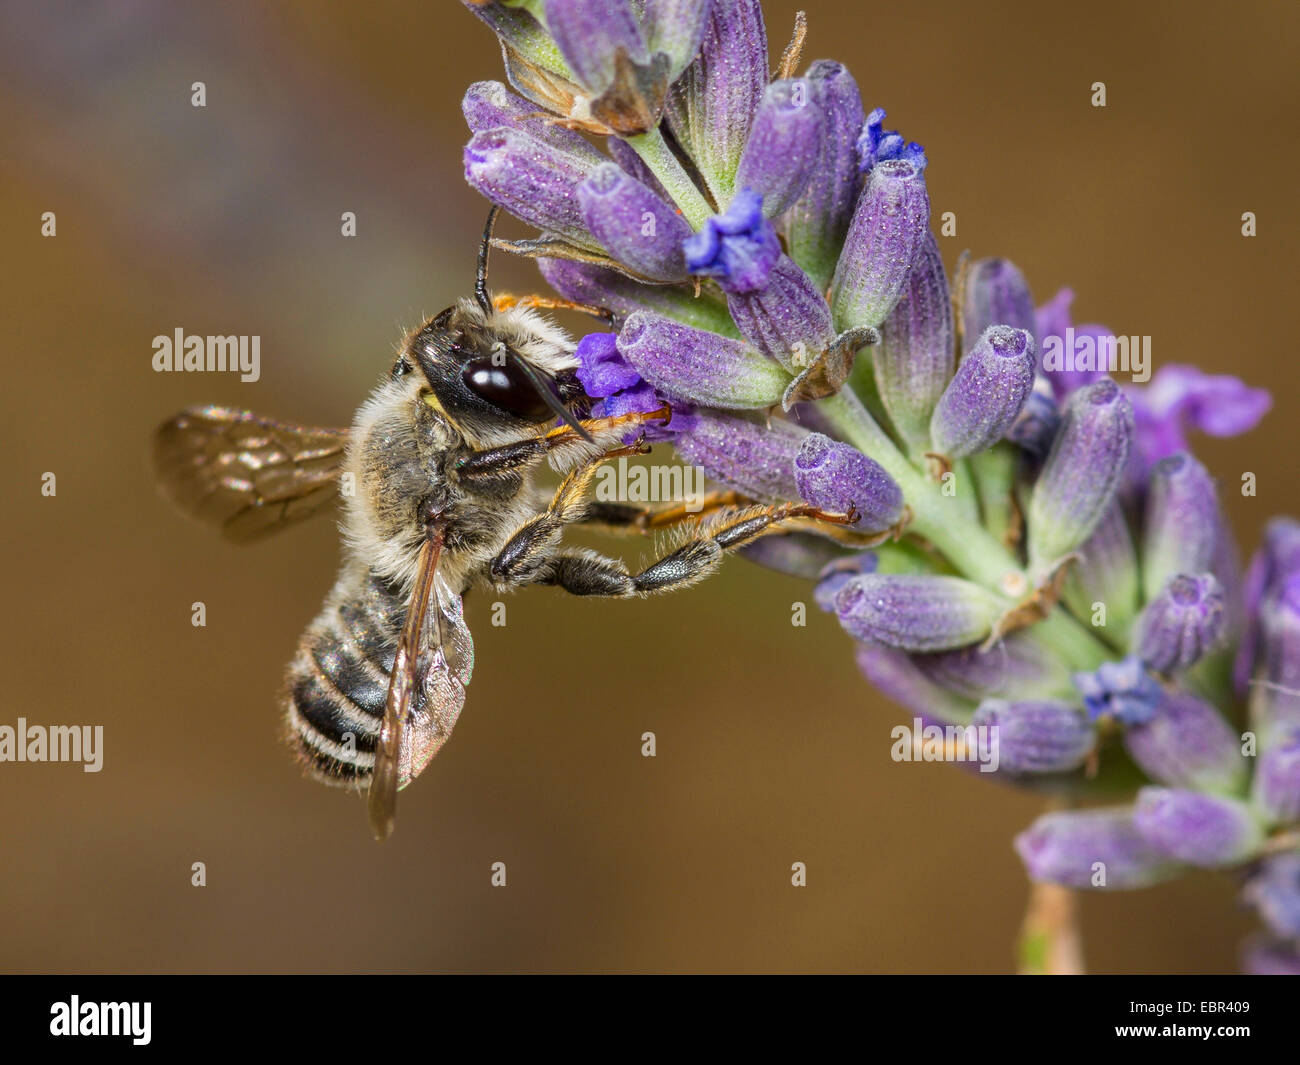 Leafcutter bee, Leafcutter-bee (Megachile ericetorum, Chalicodoma ericetorum, Pseudomegachile ericetorum), male foraging on English lavender (Lavandula angustifolia), Germany Stock Photo